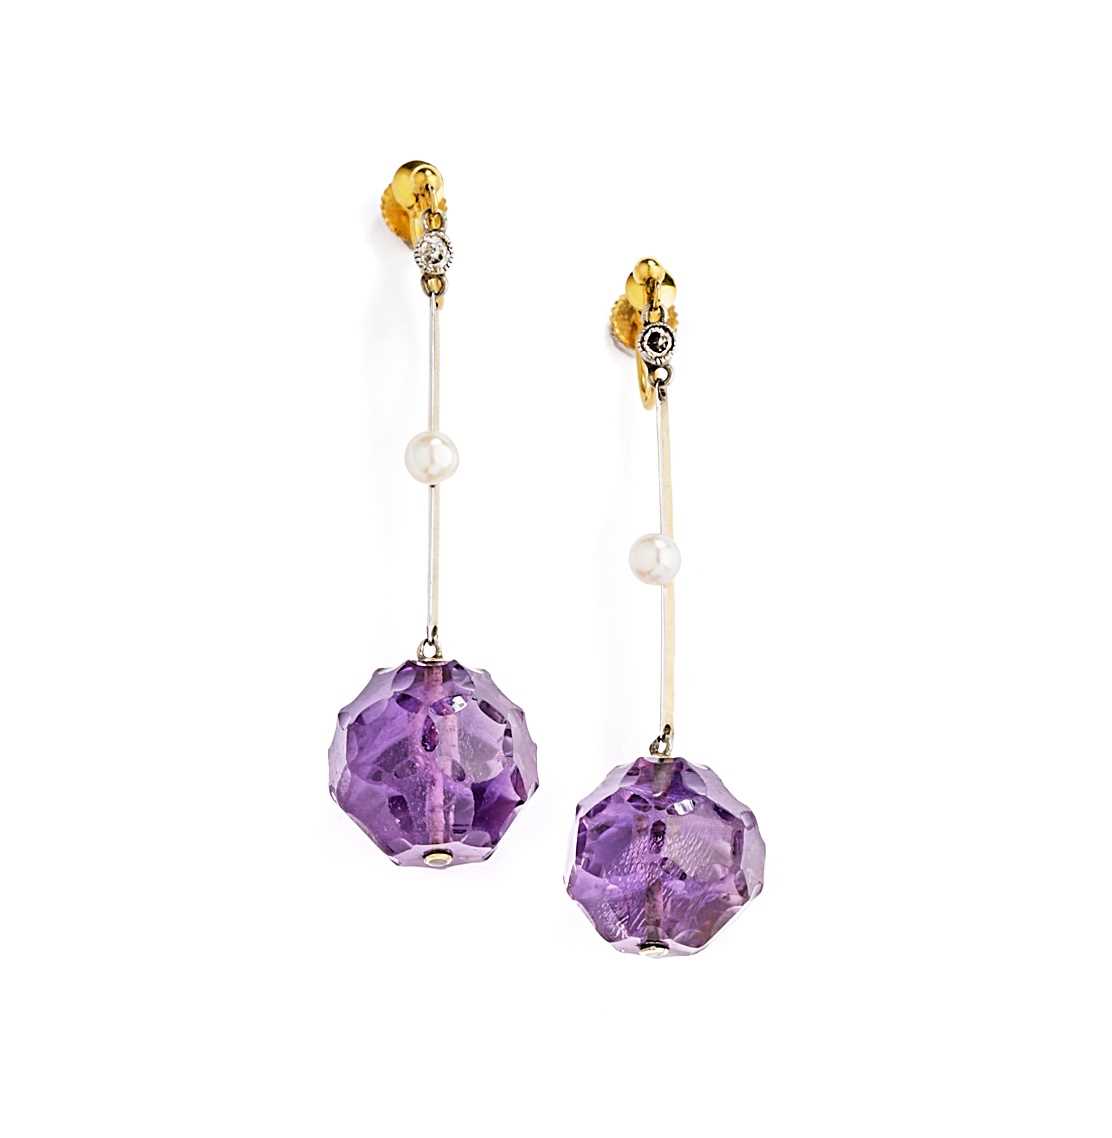 Lot 428 - TWO PAIRS OF GOLD, AMETHYST AND DIAMOND PENDENT EARRINGS, 1900s